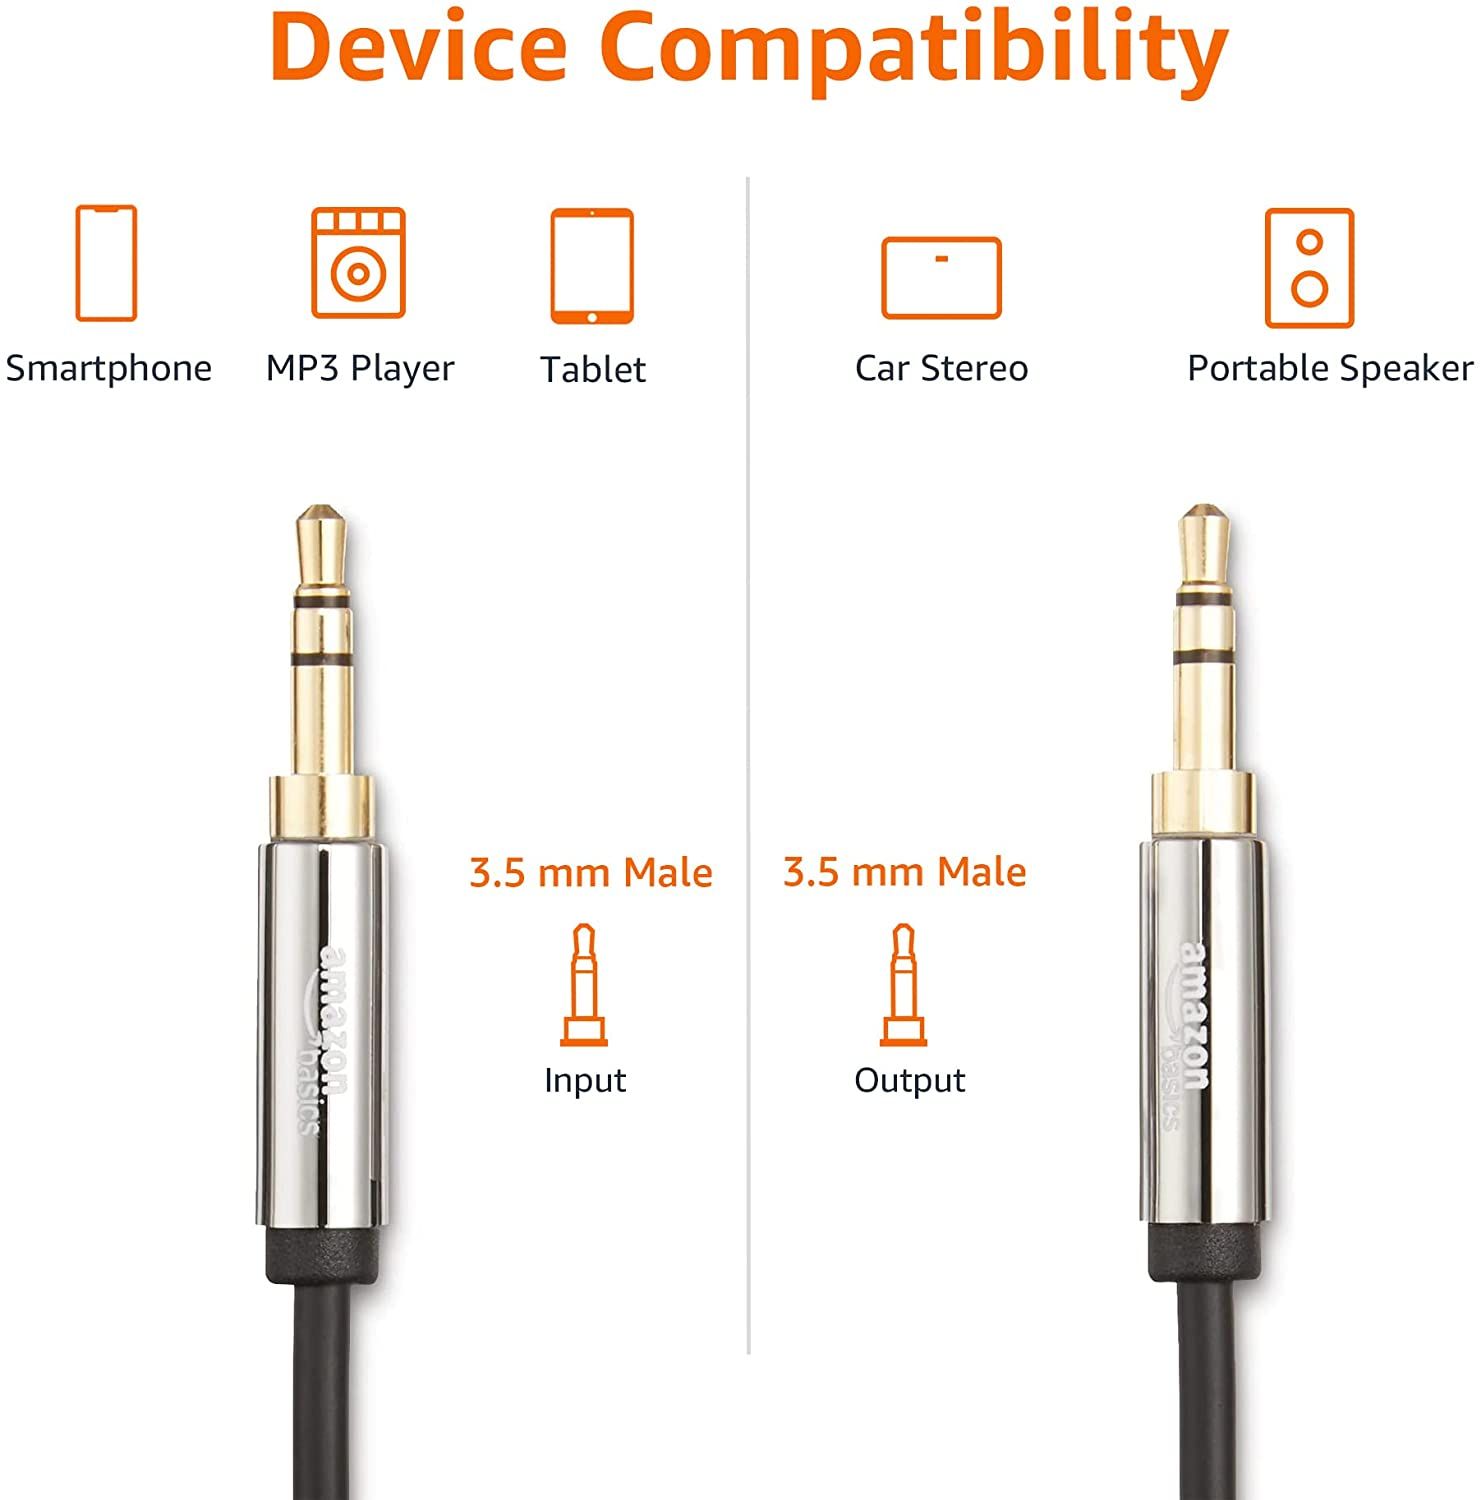 Amazon Basics 3.5 mm Male to Male Stereo Audio Cable Compatability